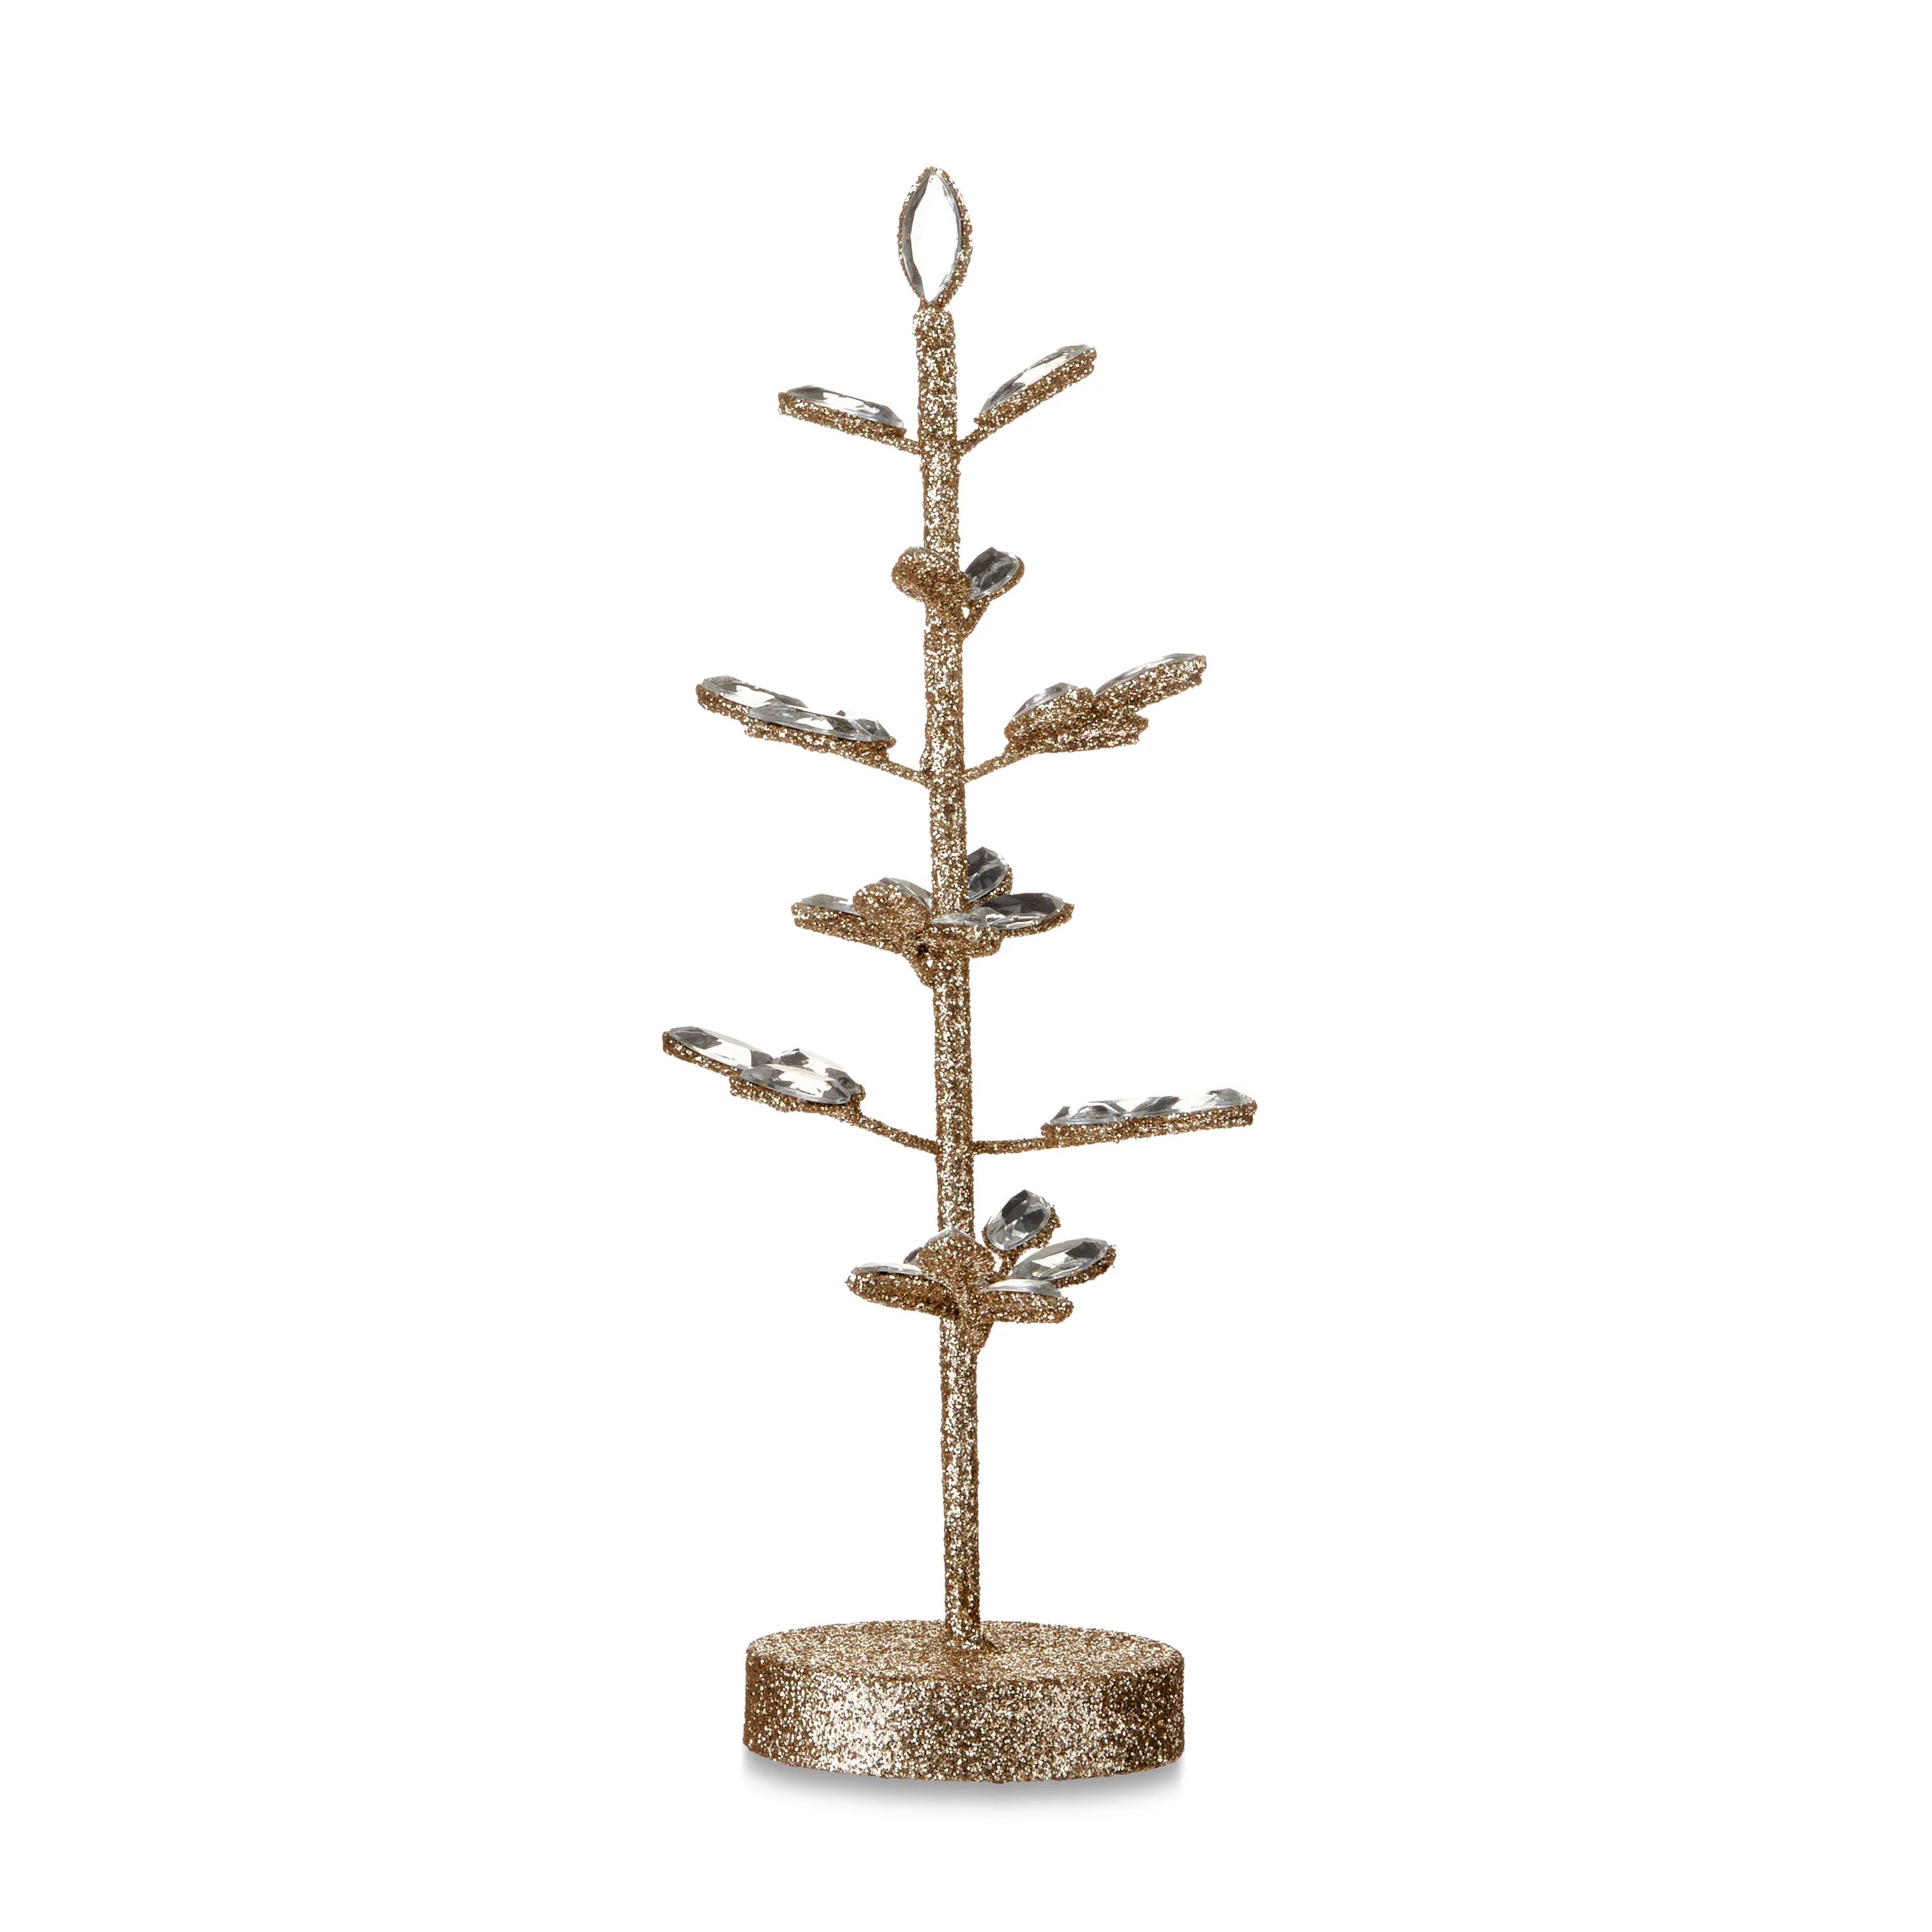 My Texas House Small Gold Glittered Wire Jewel Tree Decoration, 12 inch | Walmart (US)